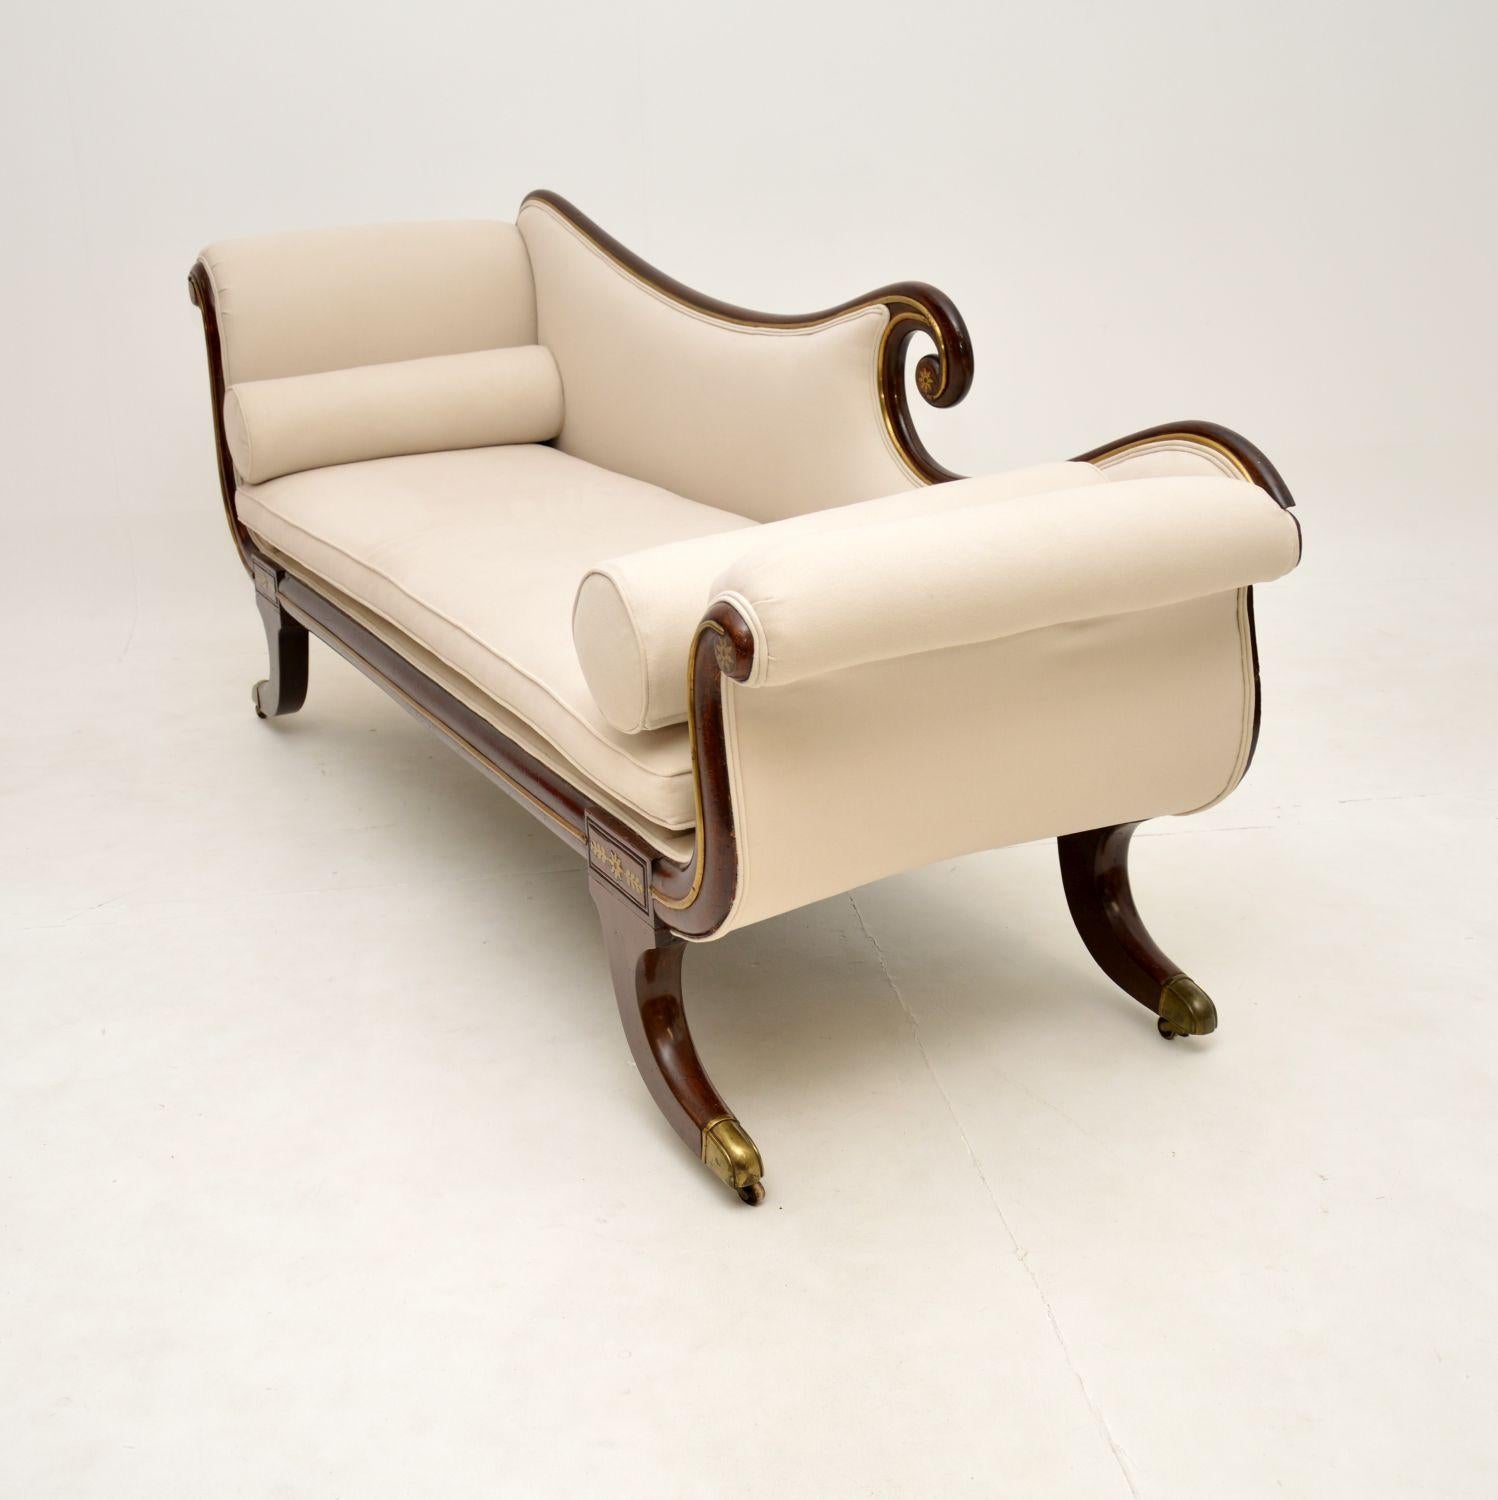 Early 19th Century Antique Regency Period Chaise Longue